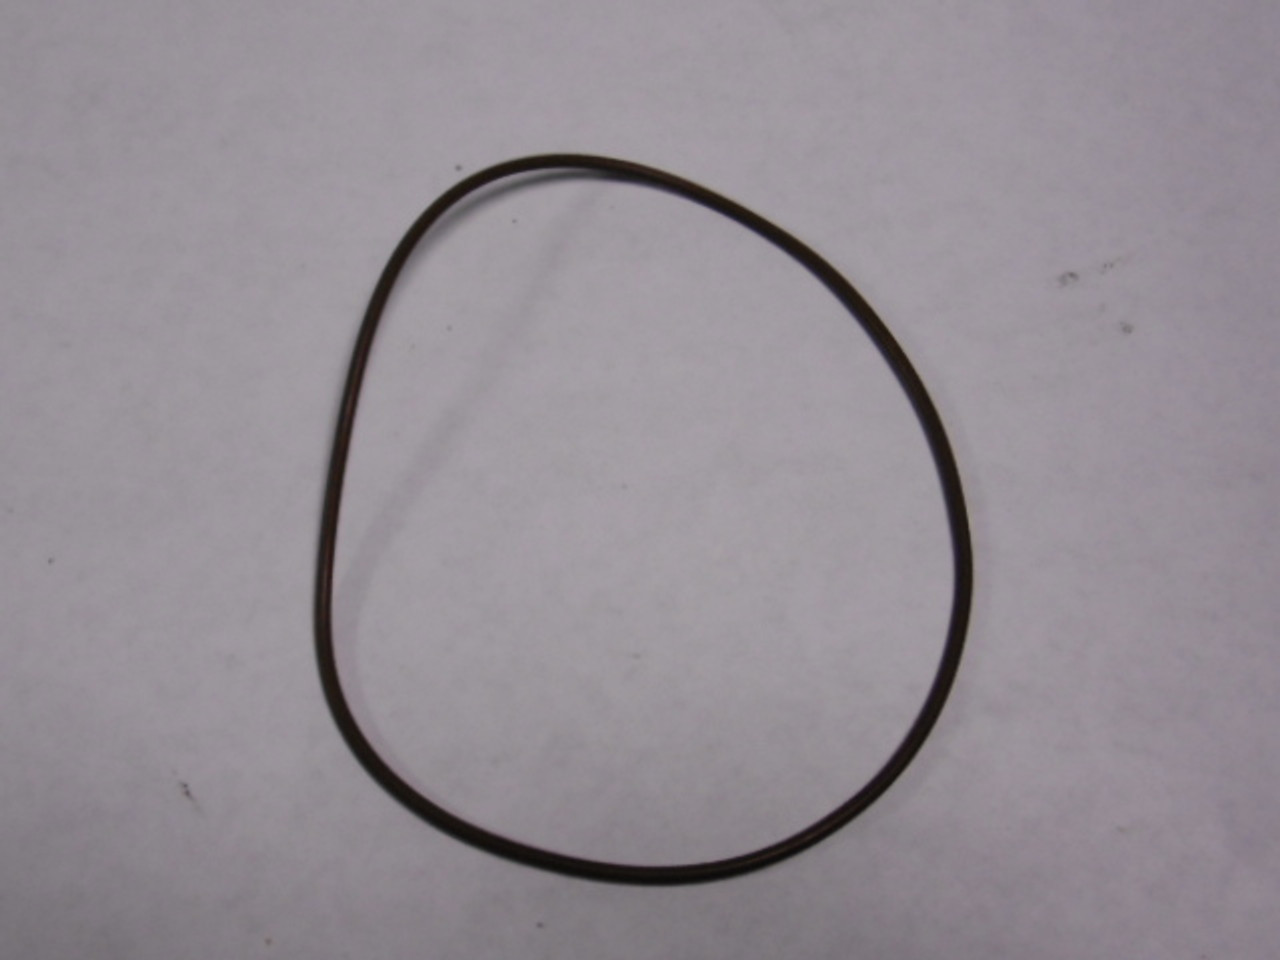 Nordson 940022A O Ring Seal Pack of 4pcs ! NWB !